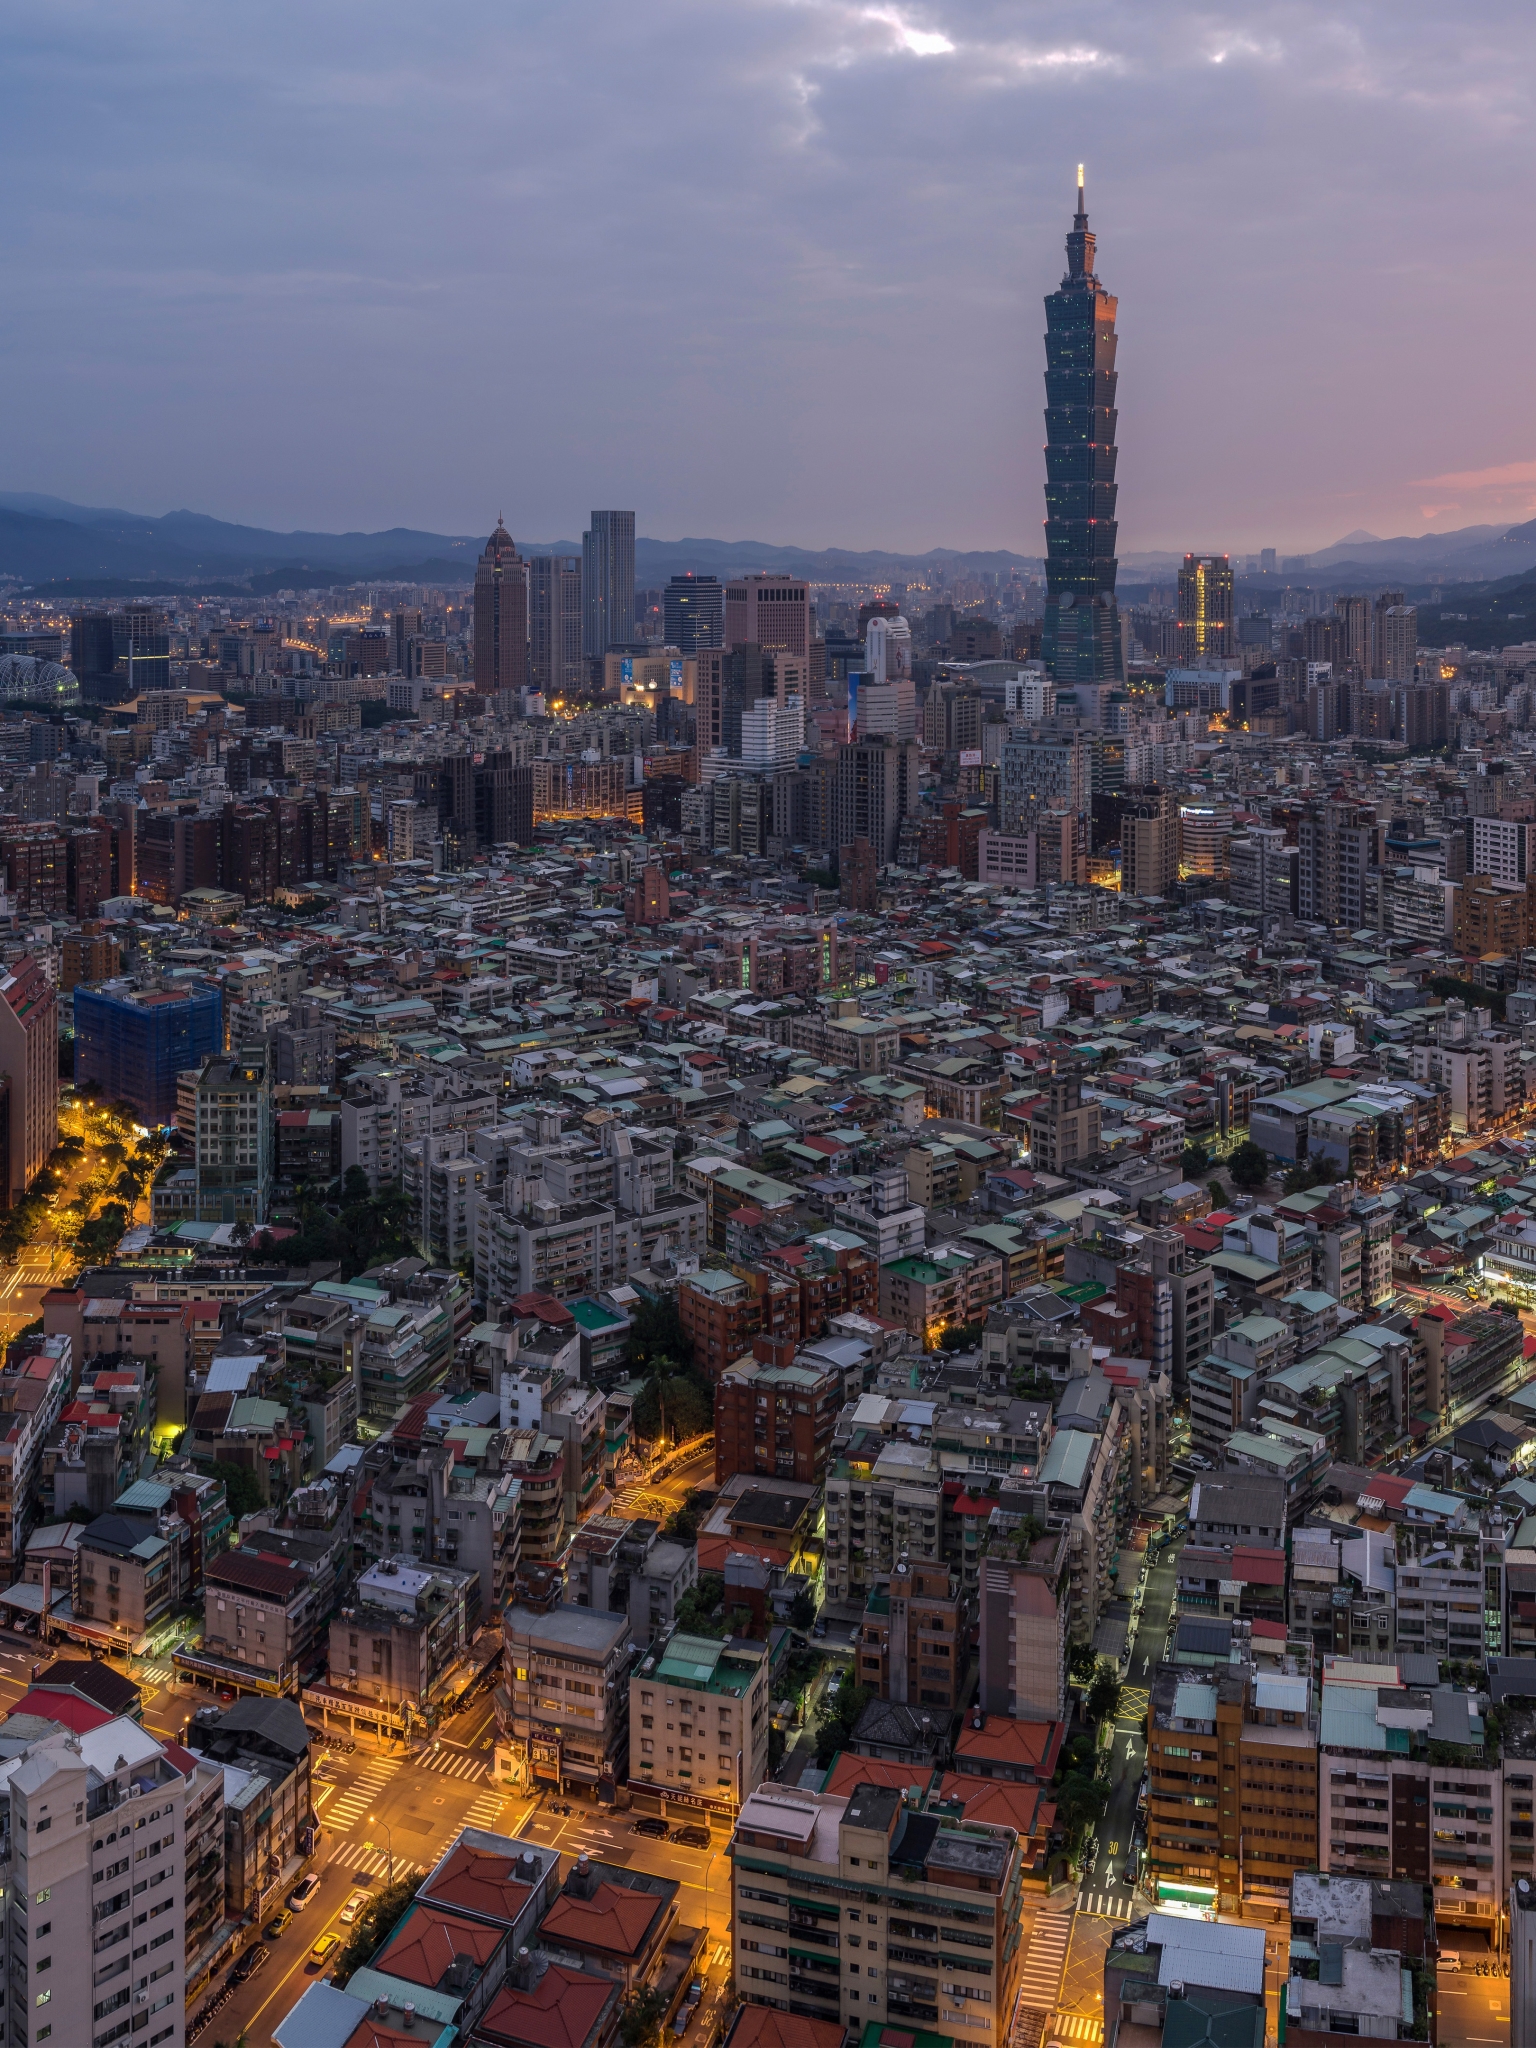 Download mobile wallpaper Cities, City, Skyscraper, Building, Cityscape, Taiwan, Taipei, Man Made, Taipei 101 for free.